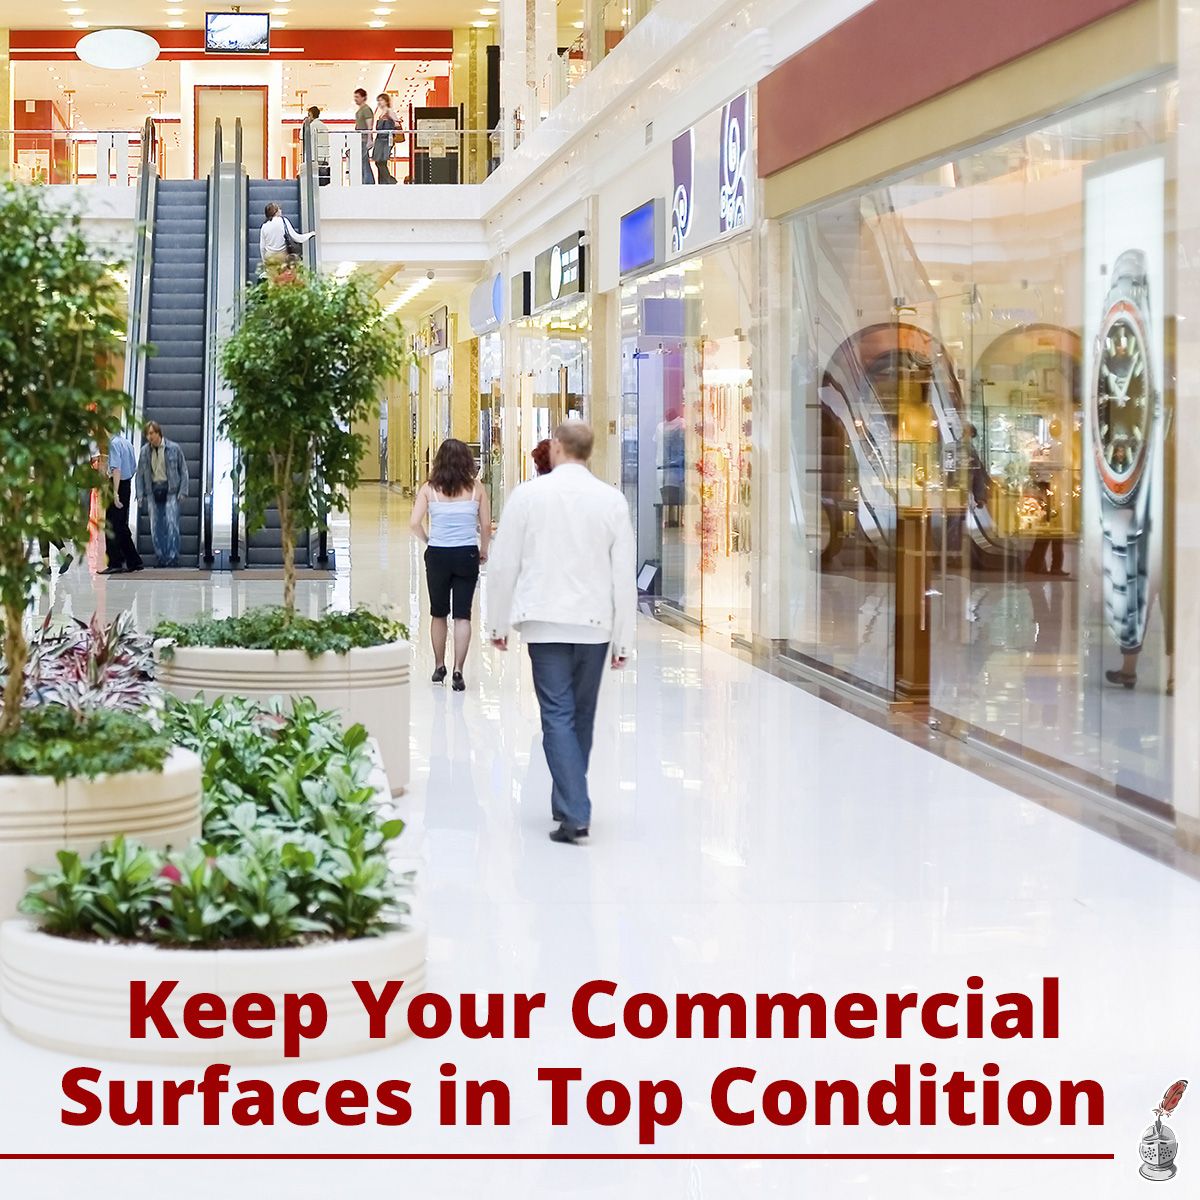 Keep Your Commercial Surfaces on Top Condition